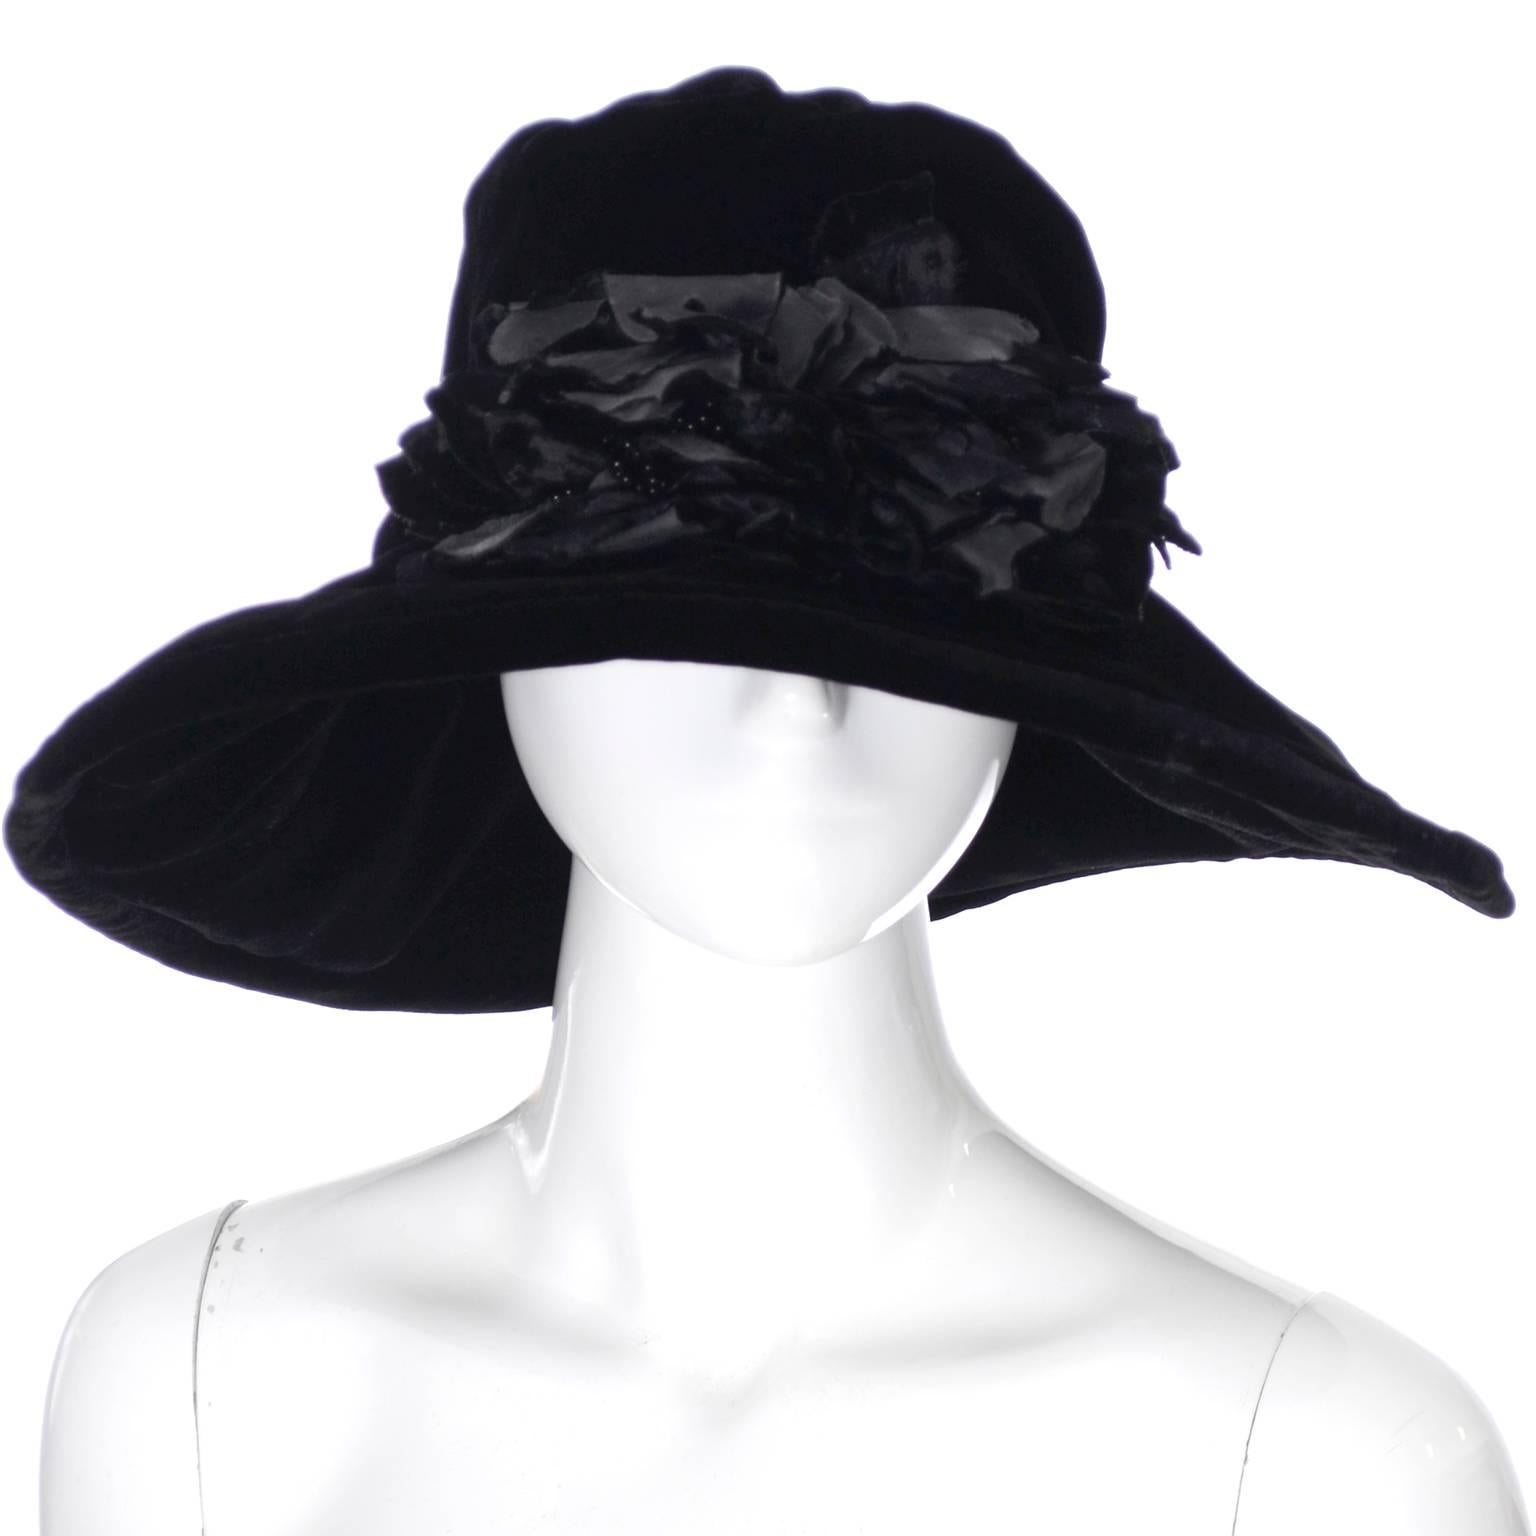 This is a fabulous Donna Karan black velvet floppy hat with a wide brim and beaded silk flowers.  The hat is labeled one size fits all, it has a 23" circumference on the inside at the band.  The brim is 5" wide and the hat still has its